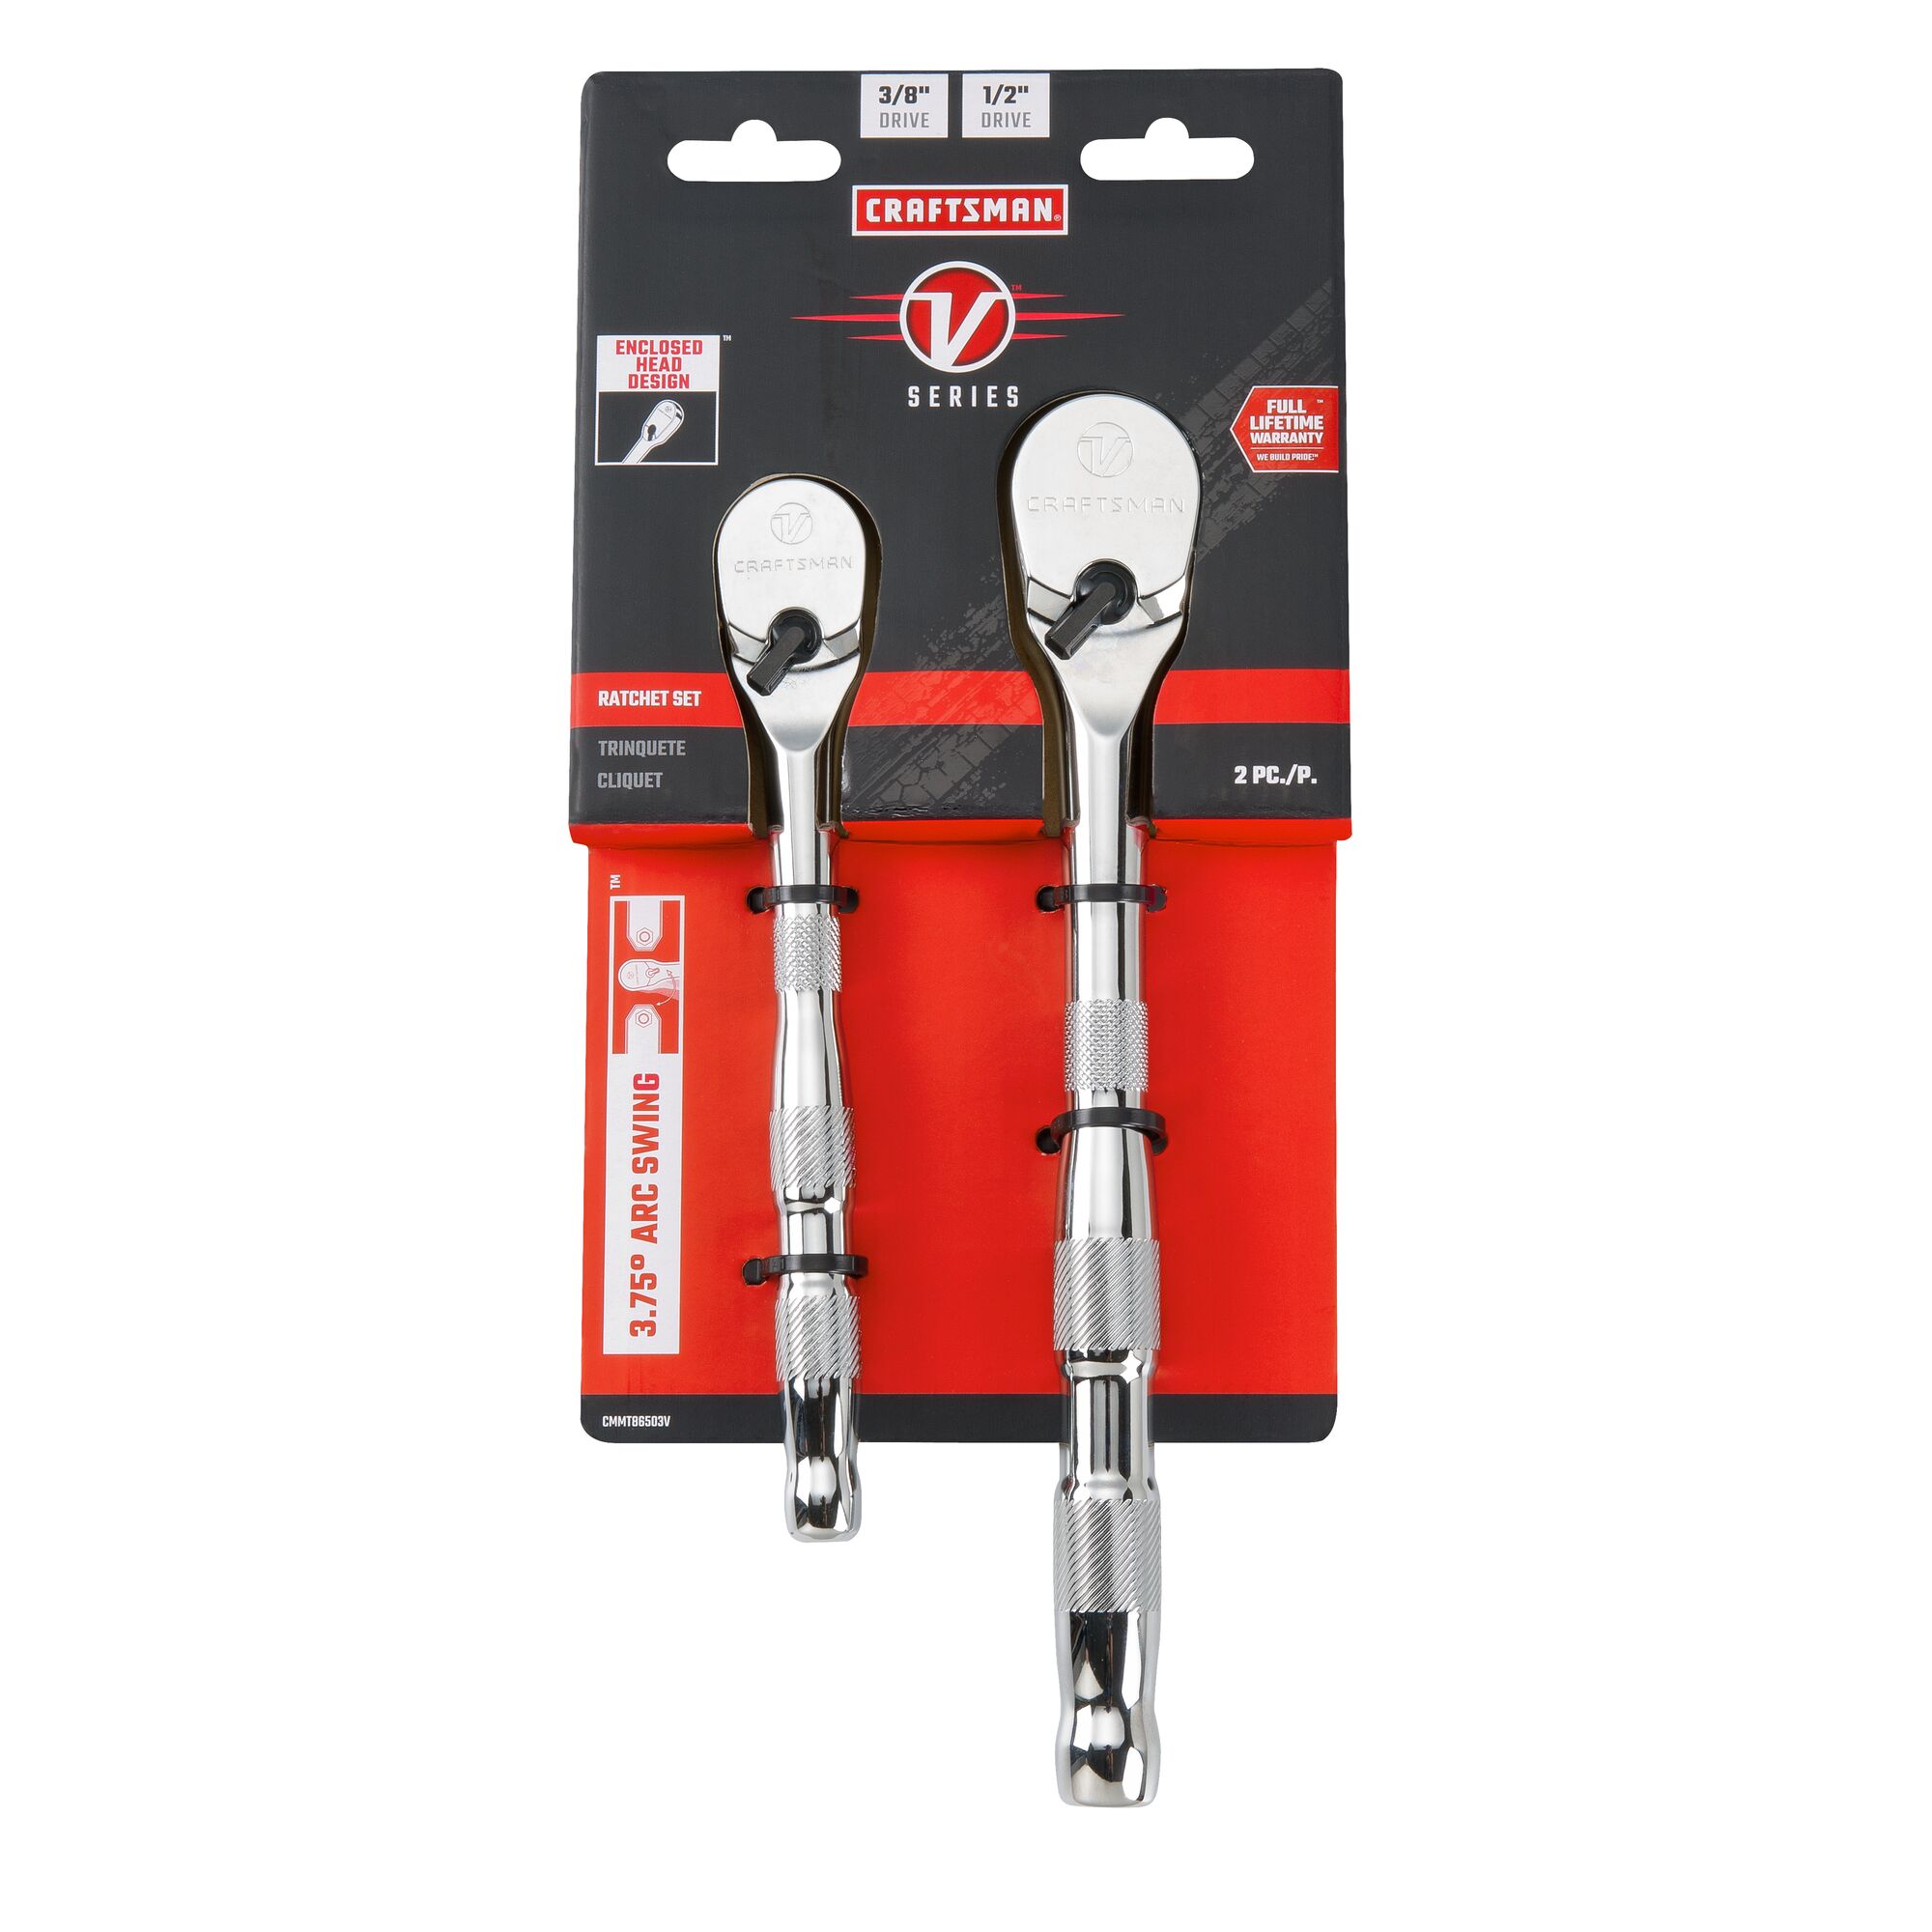 V series three eighth inch and half inch drive ratchet in packaging. 2 pack